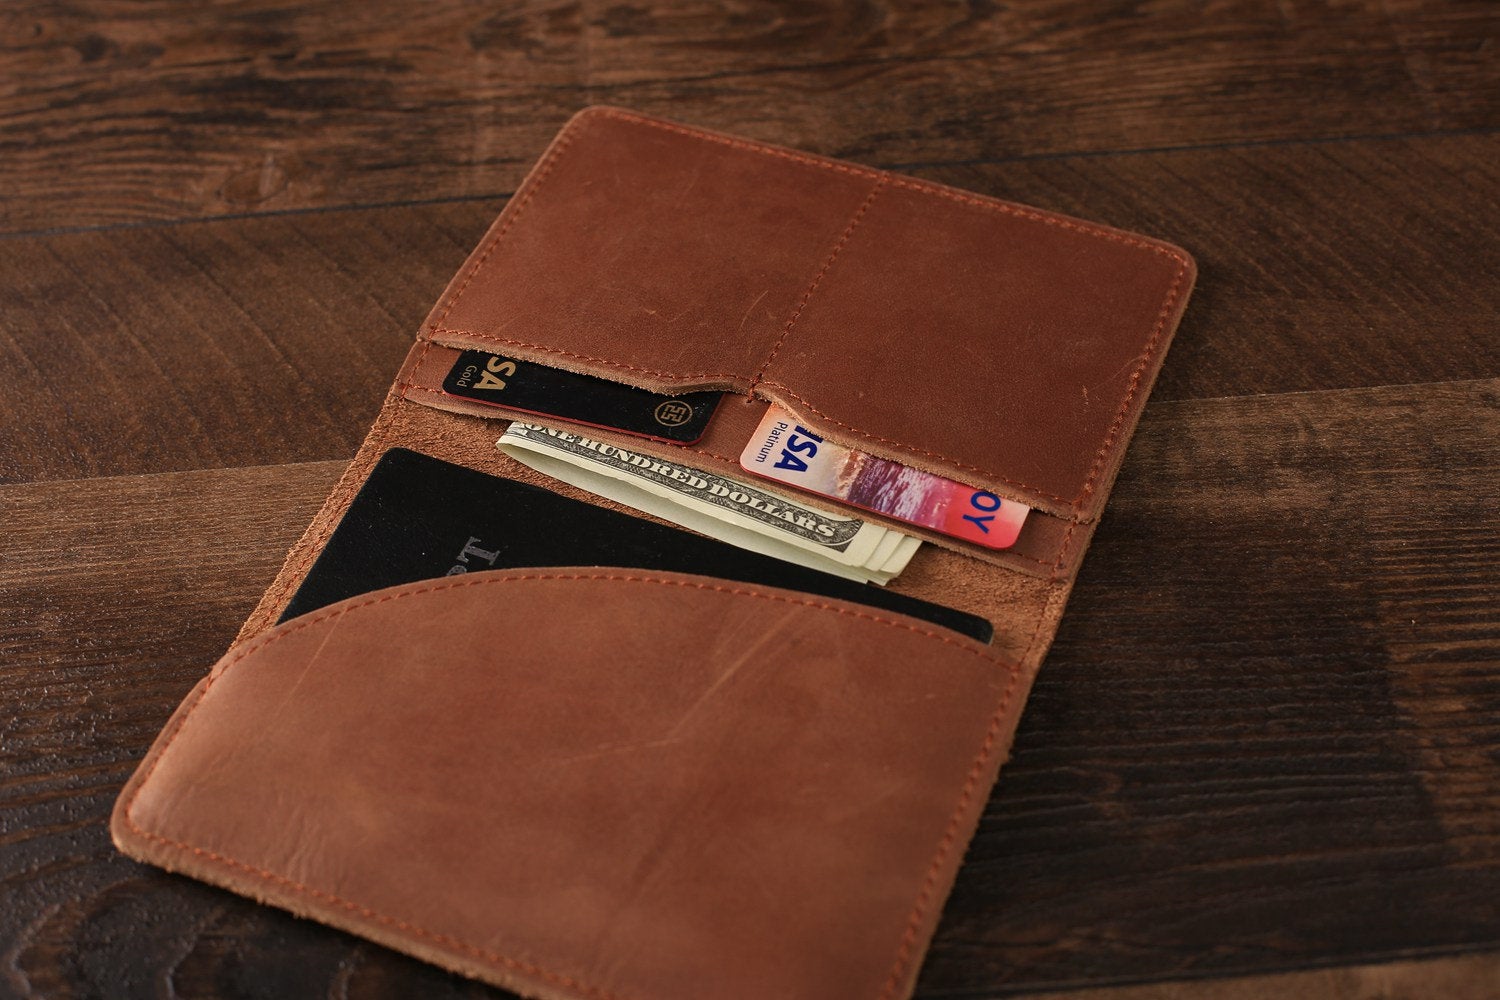 Groomsmen Gifts Personalized Leather Travel Wallet, Passport Holder Coffee / Yes